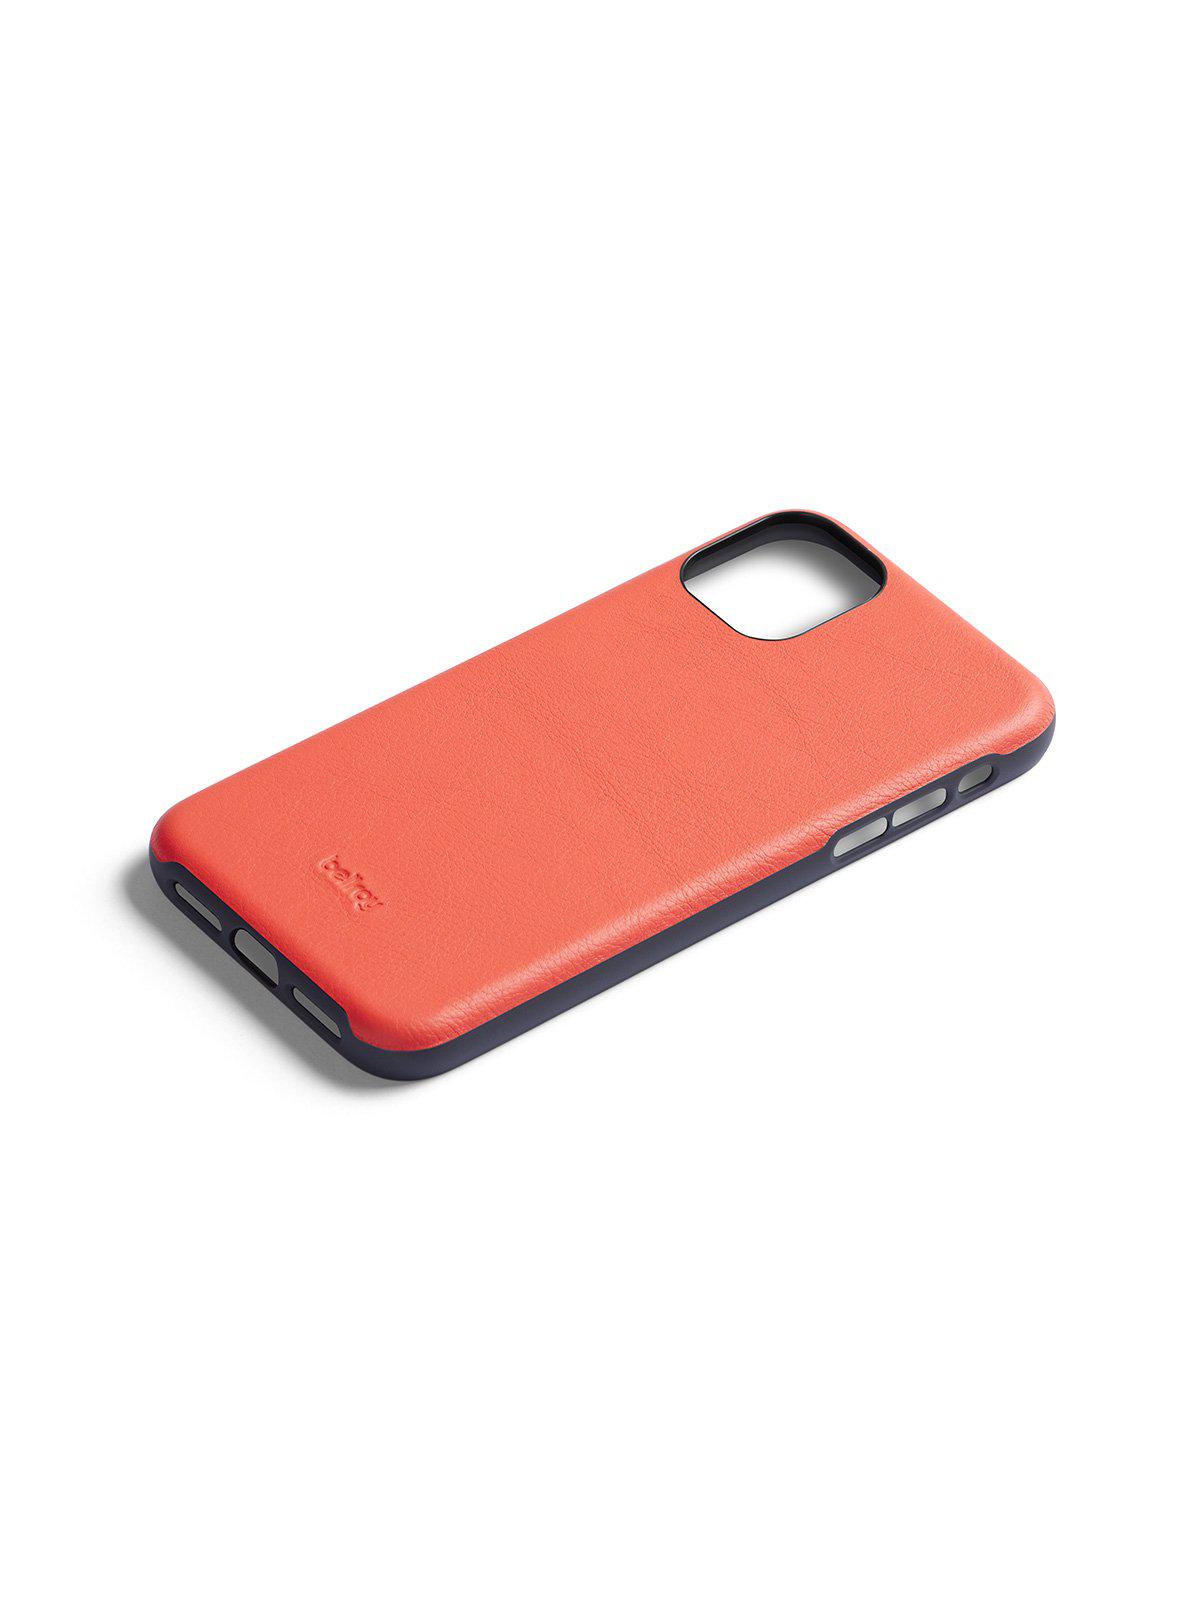 Bellroy Leather Phone Case for iPhone 11 Pro Max Coral - MORE by Morello Indonesia